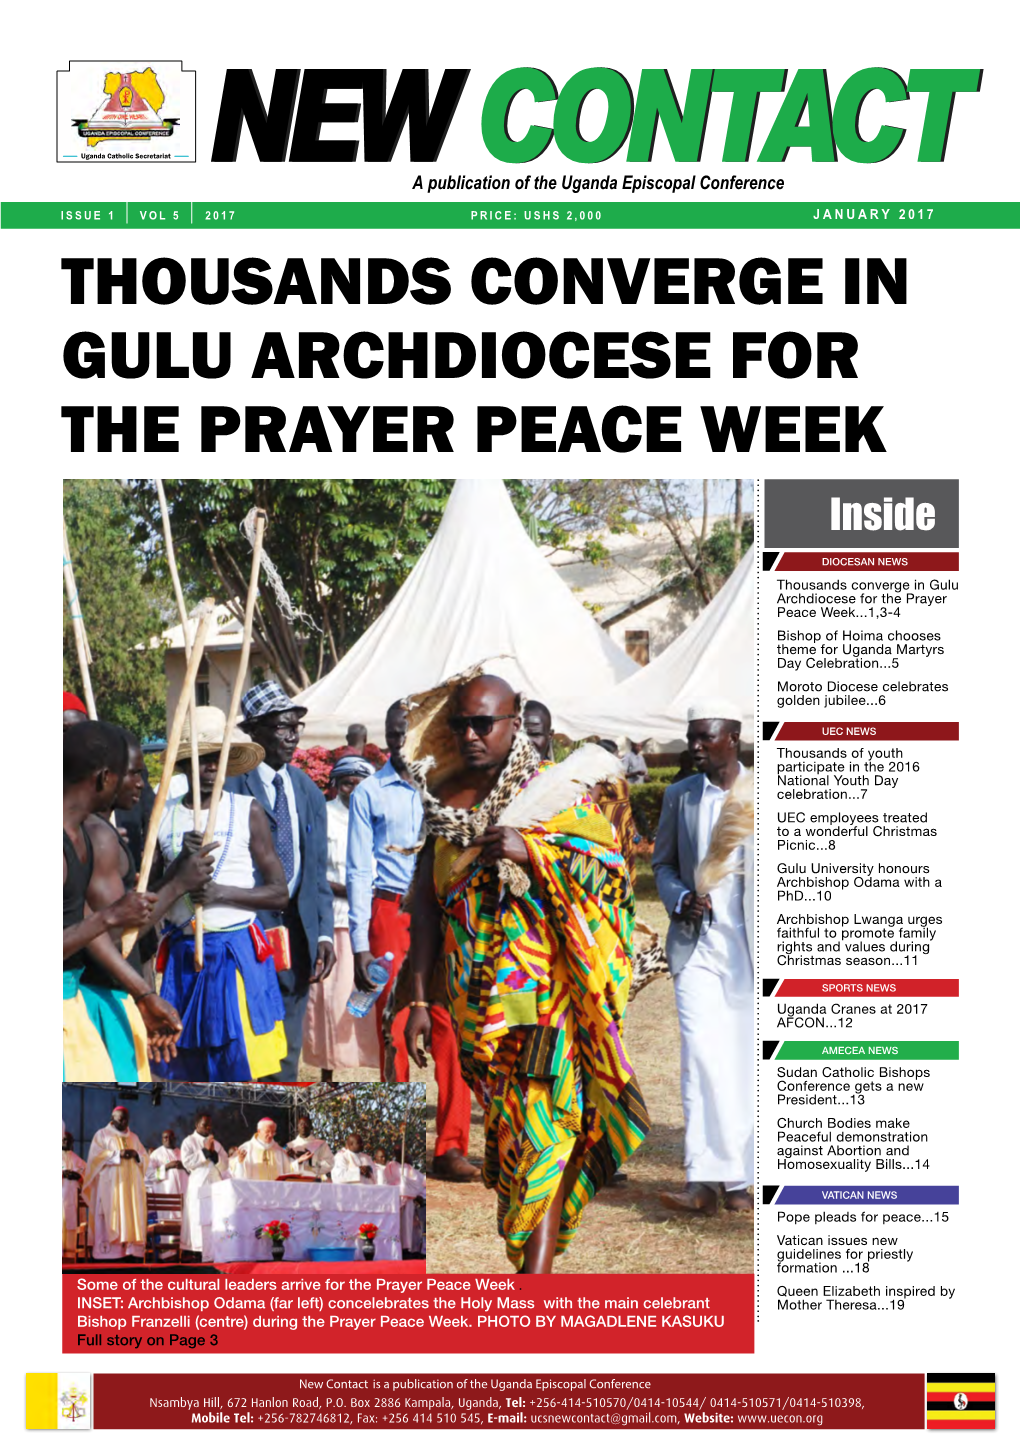 Thousands CONVERGE in Gulu ARCHDIOCESE for the Prayer Peace Week Inside